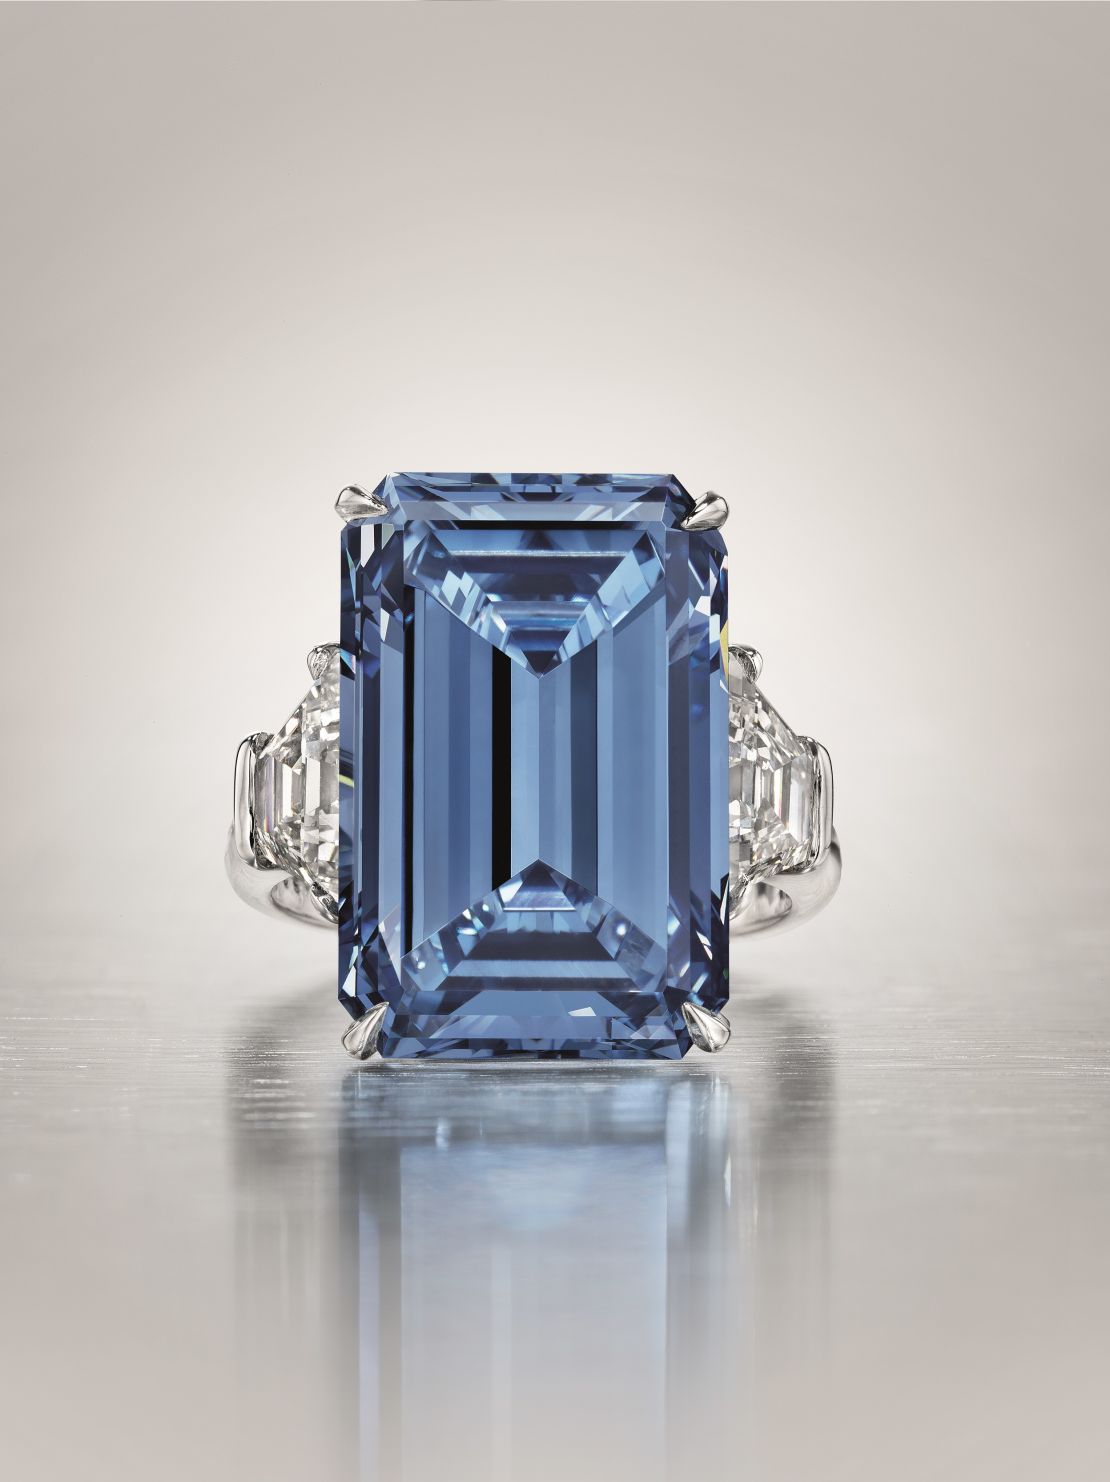 The Oppenheimer Blue, the world's largest blue diamond, sold for $57.5 million at a Christie's auction in May, becoming the most expensive diamond ever sold at auction.